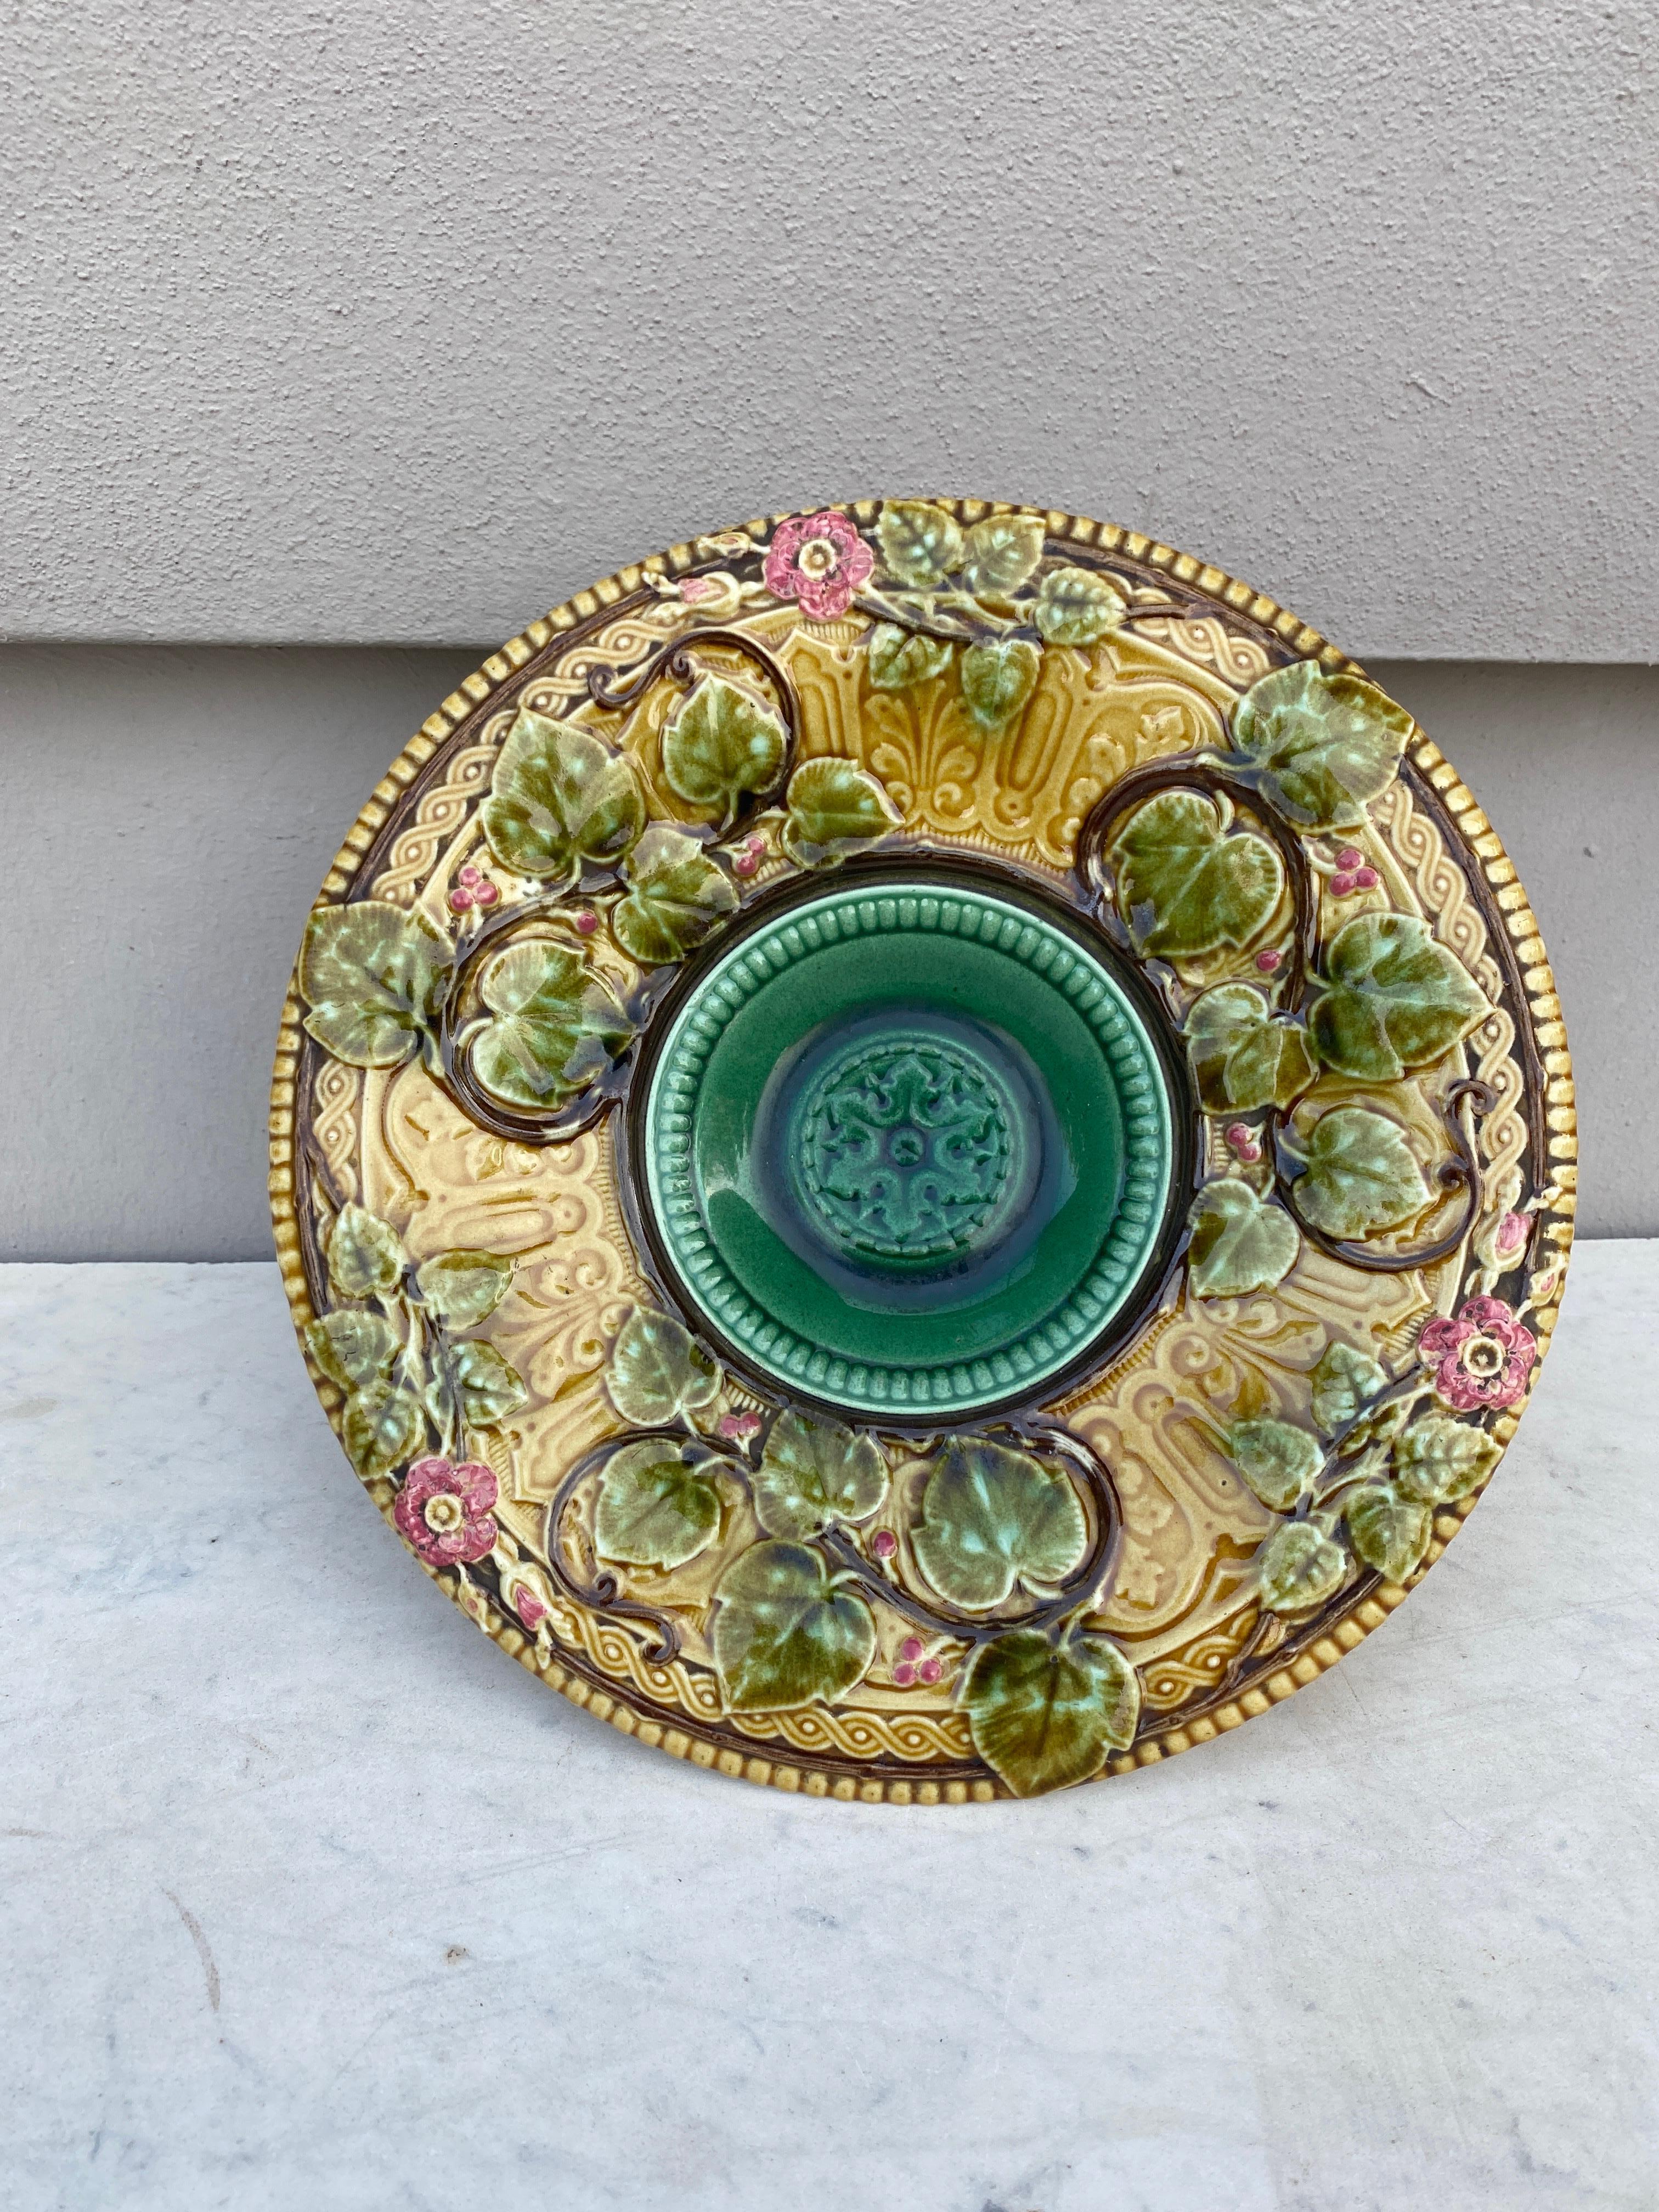 French rustic Majolica cake stand circa 1890.
Decorated with leaves and pink flowers.